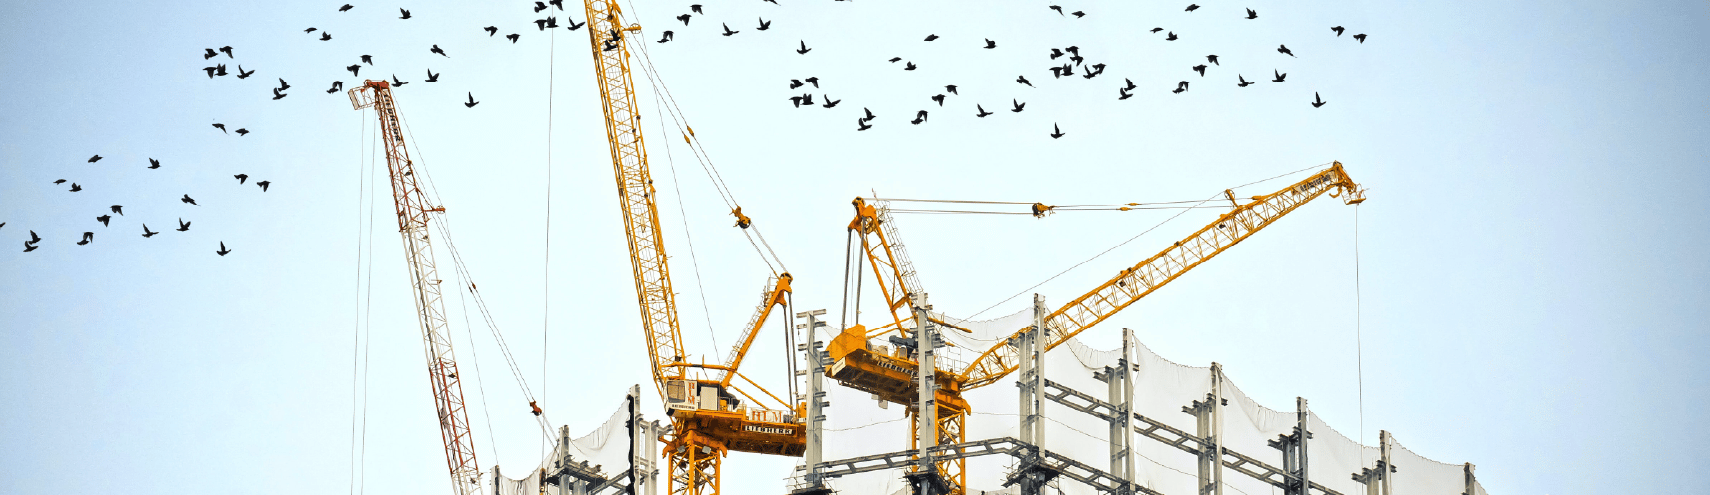 Three construction cranes with a heard of birds flying behind them